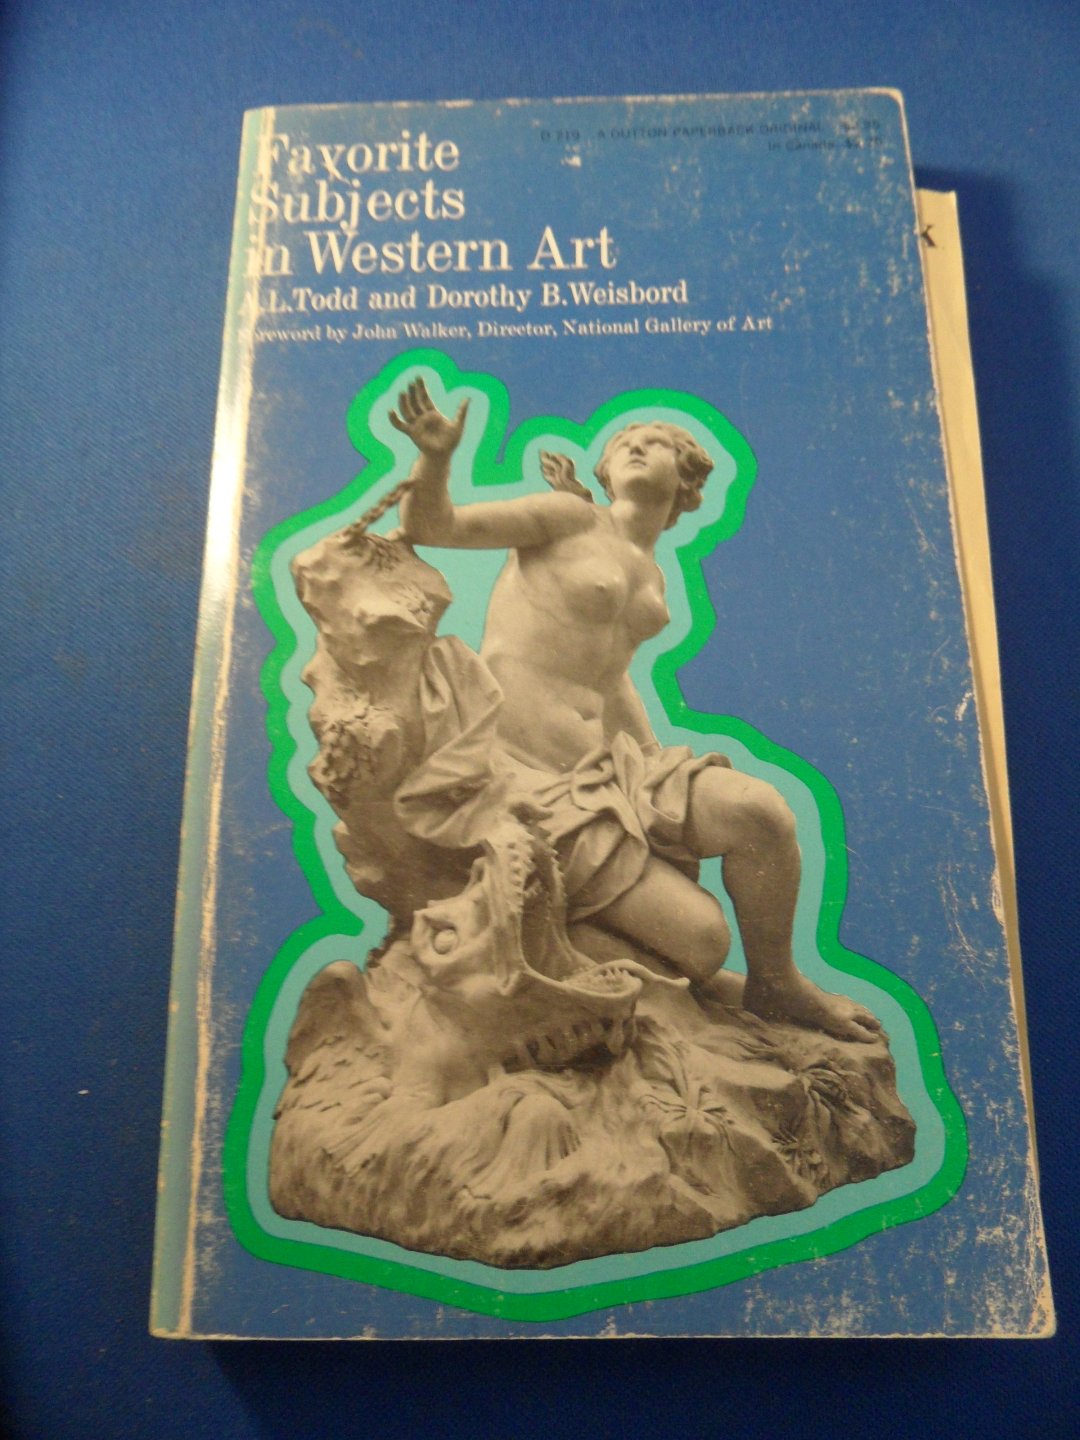 Todd, A.L. and Weisbord, Dorothy B. - Favorite Subjects in Western Art